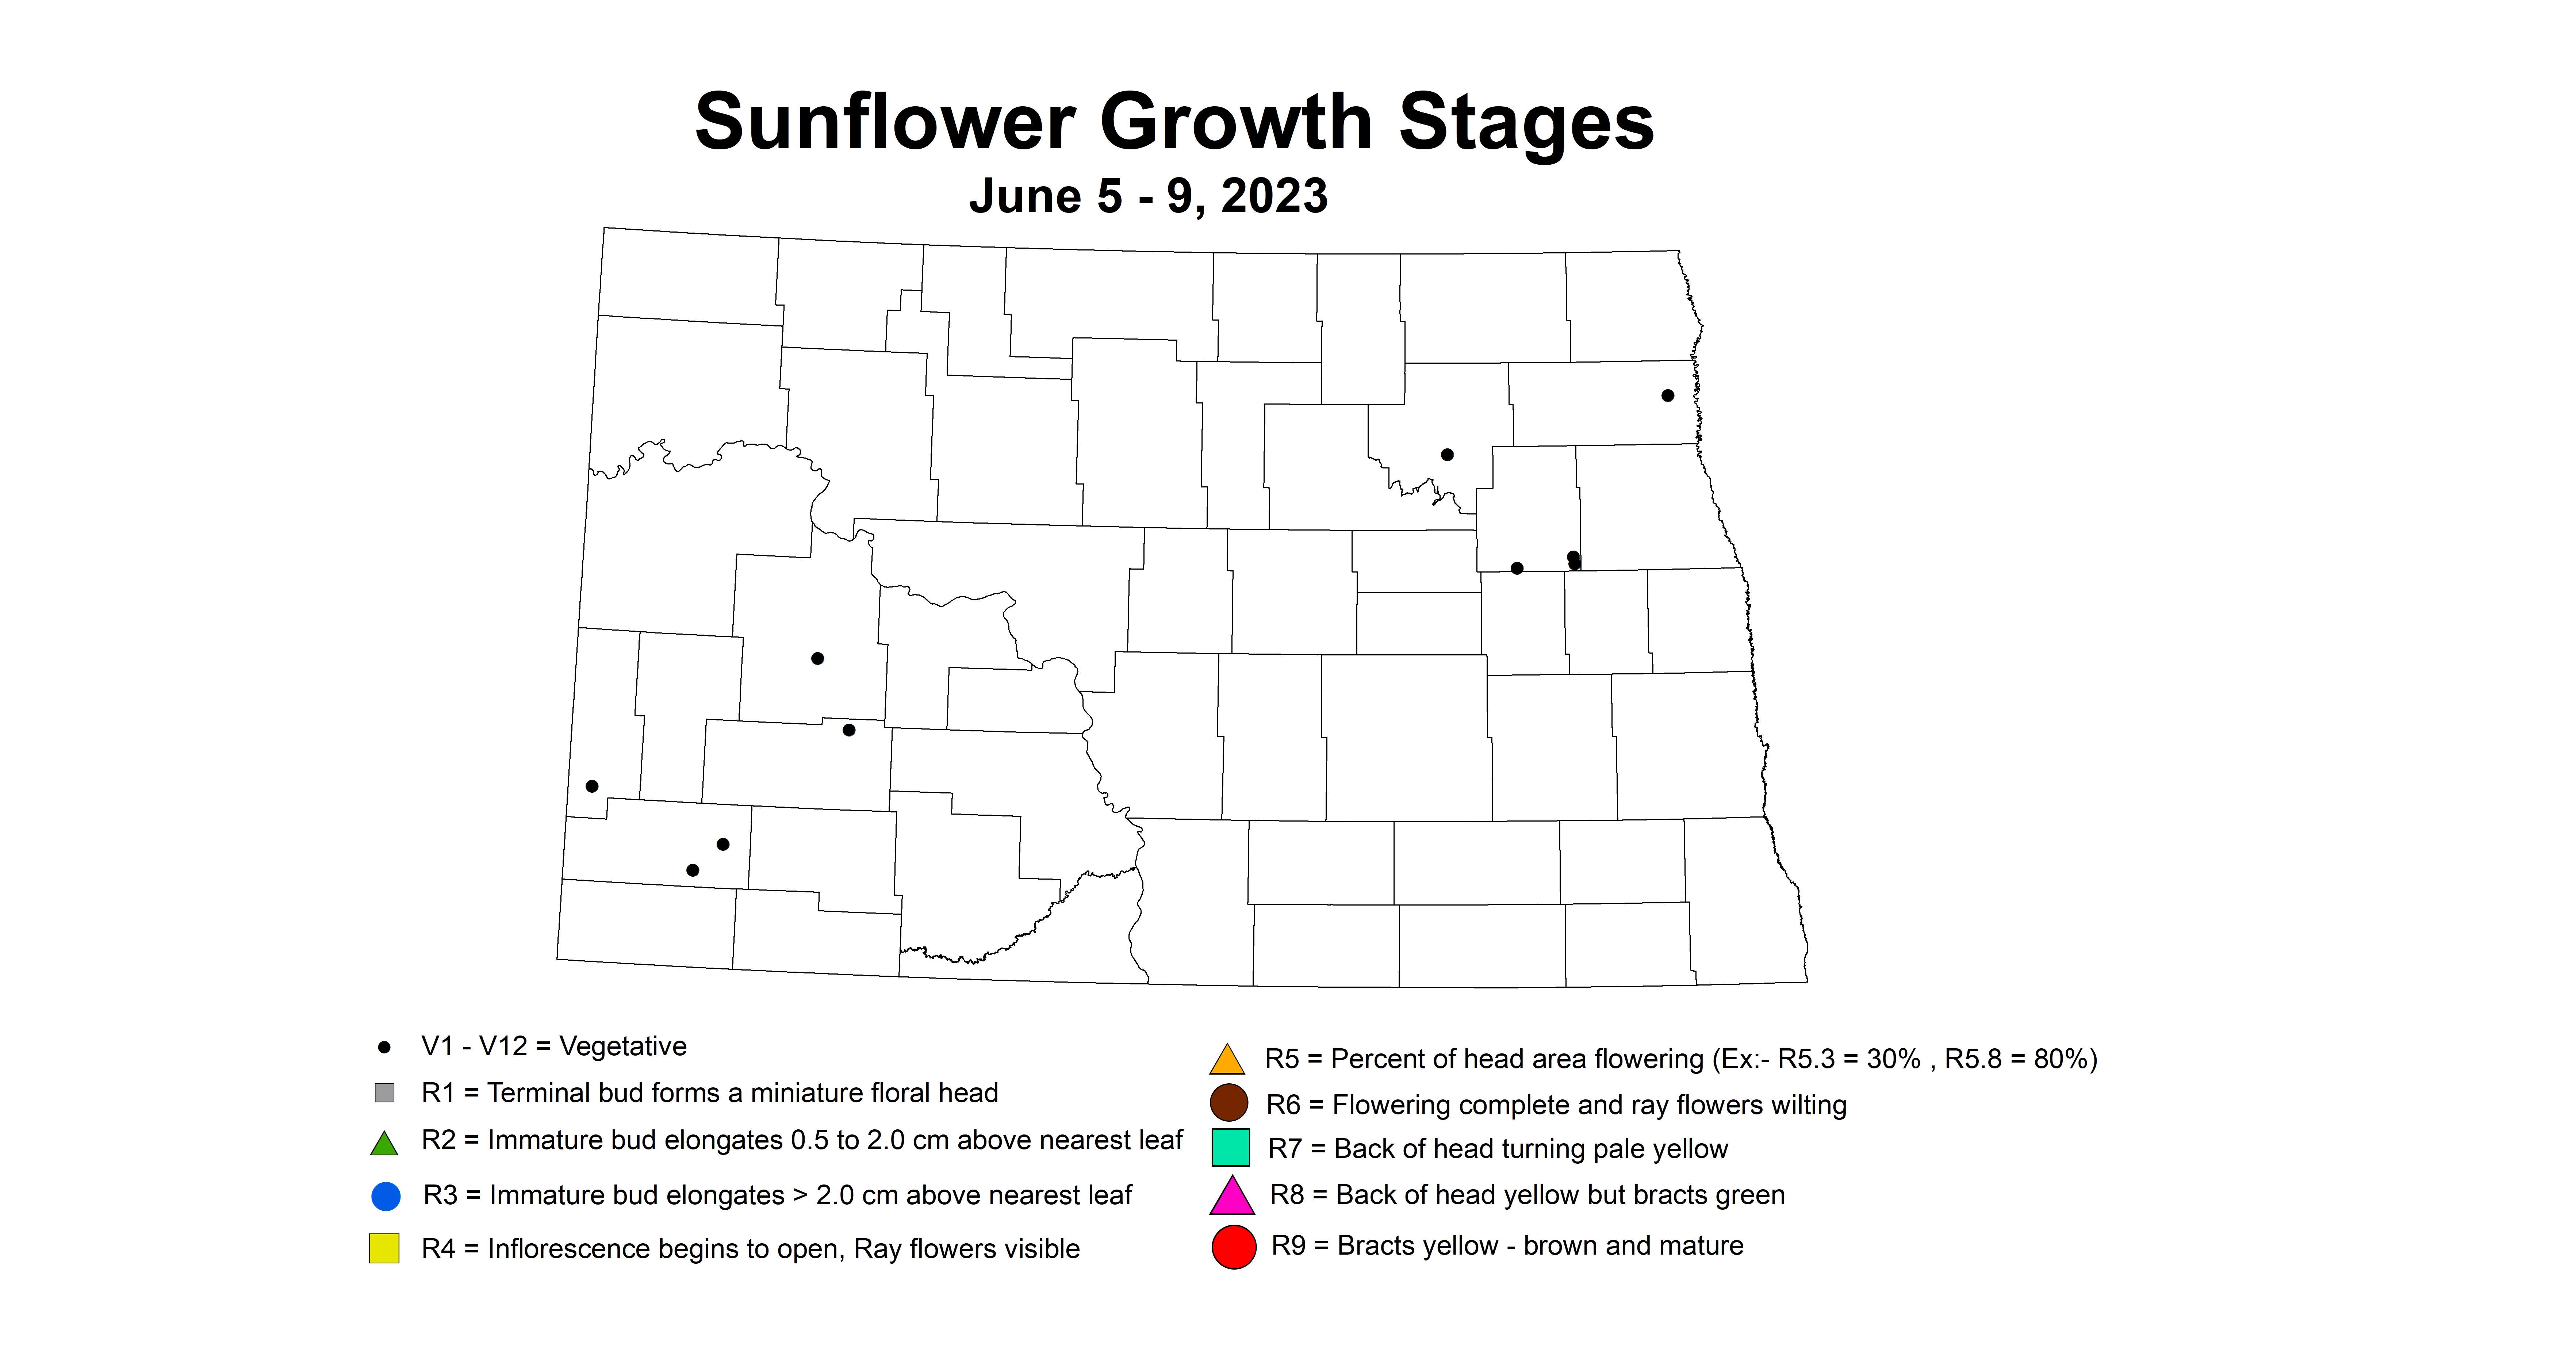 sunflower growth stages June 5-9 2023